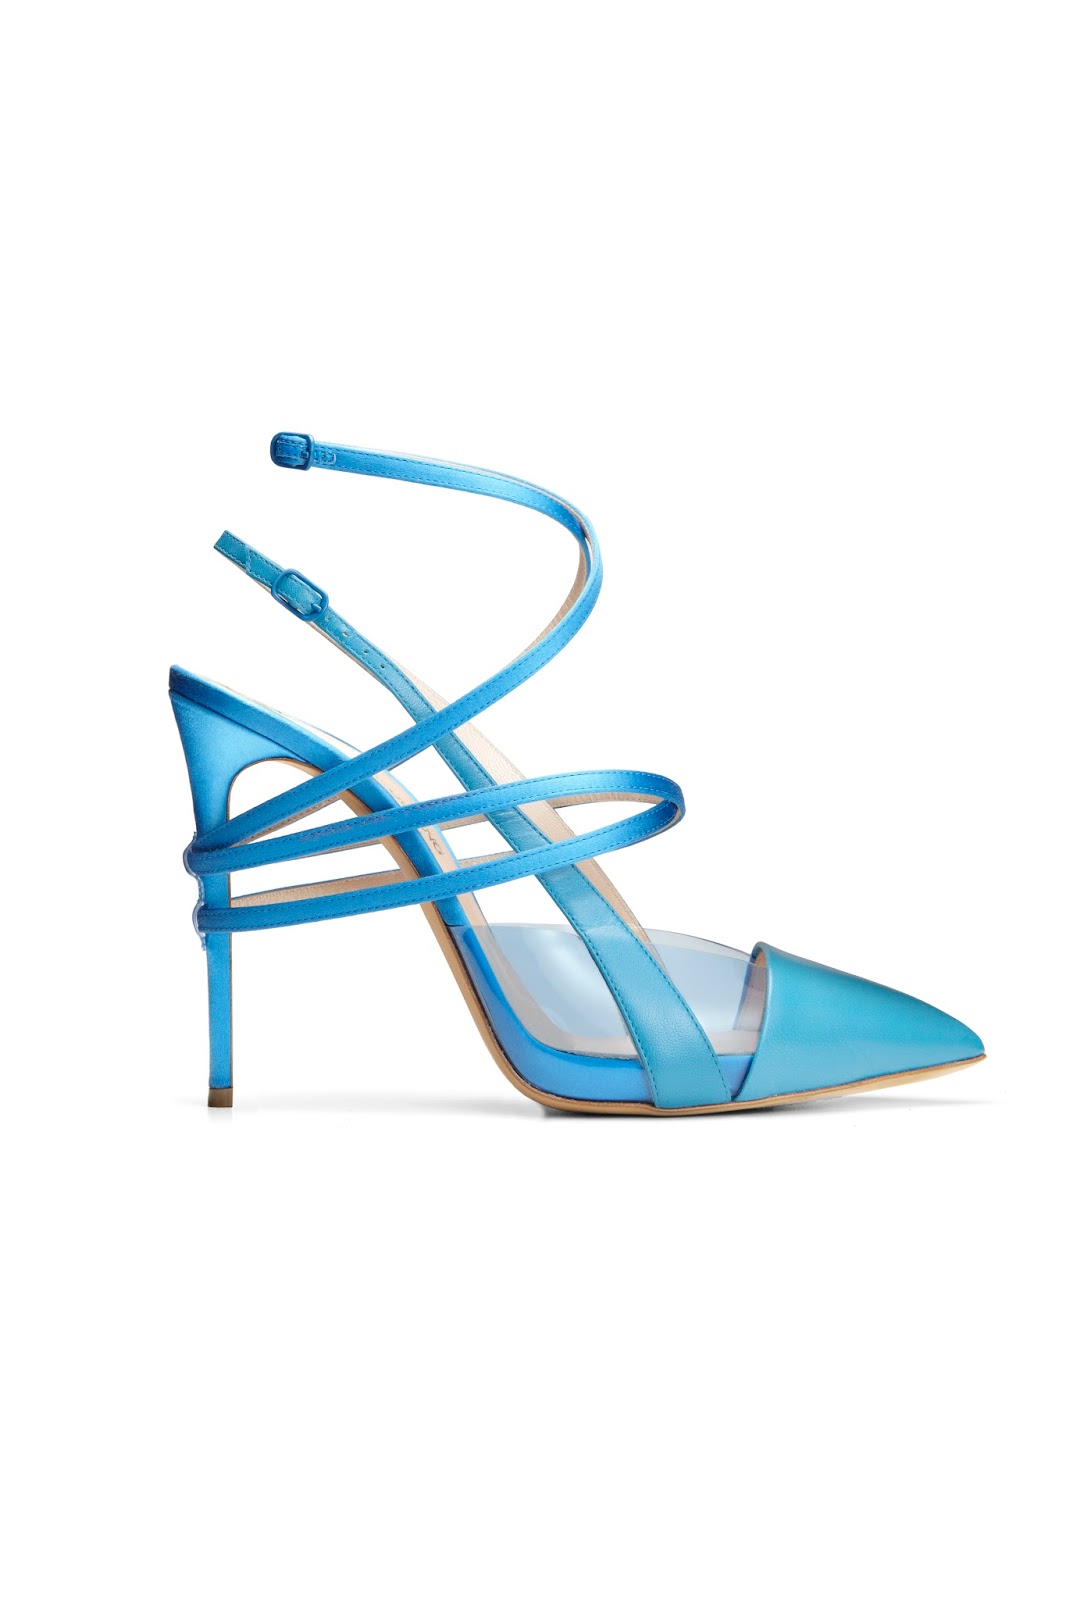 DIARY OF A CLOTHESHORSE: MUST SEE - CASADEI FOR PRABAL GURUNG SS14 ...